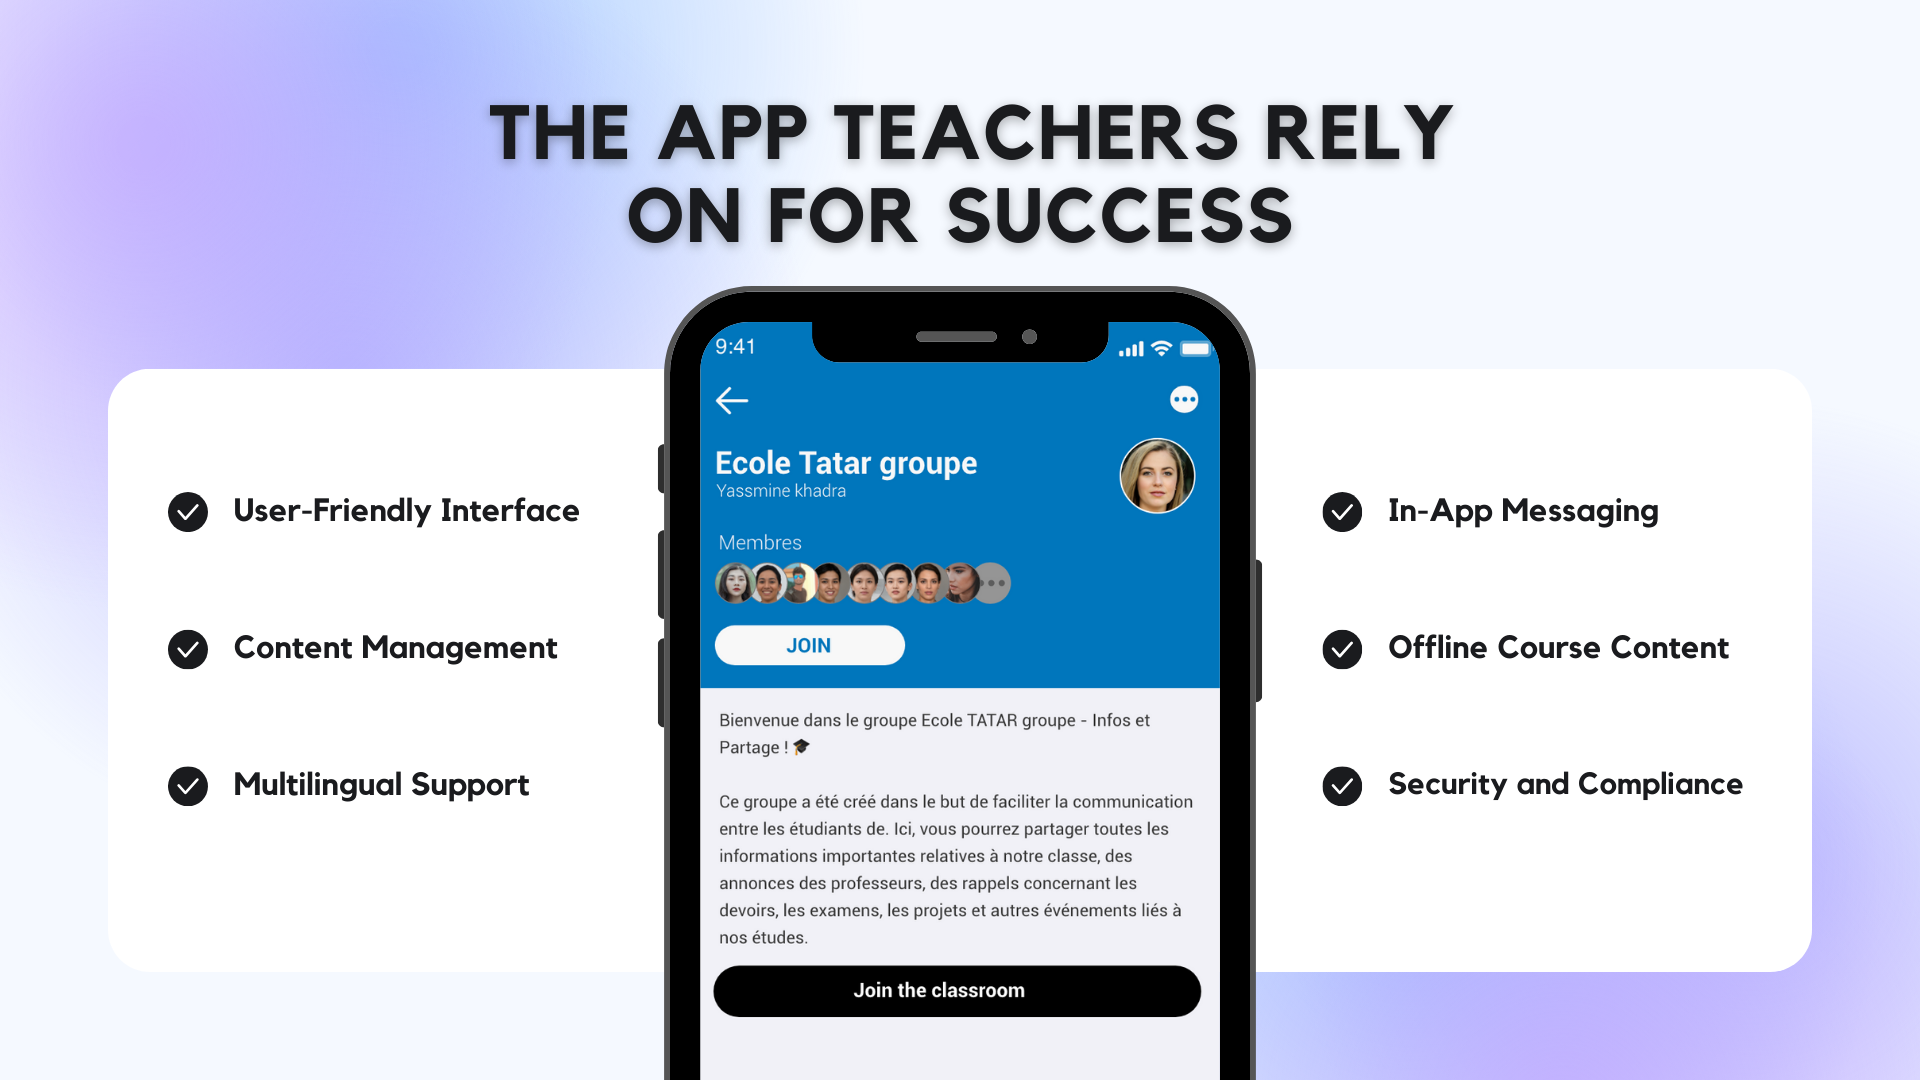 Schoolink LMS app - The way to create a bond with your students